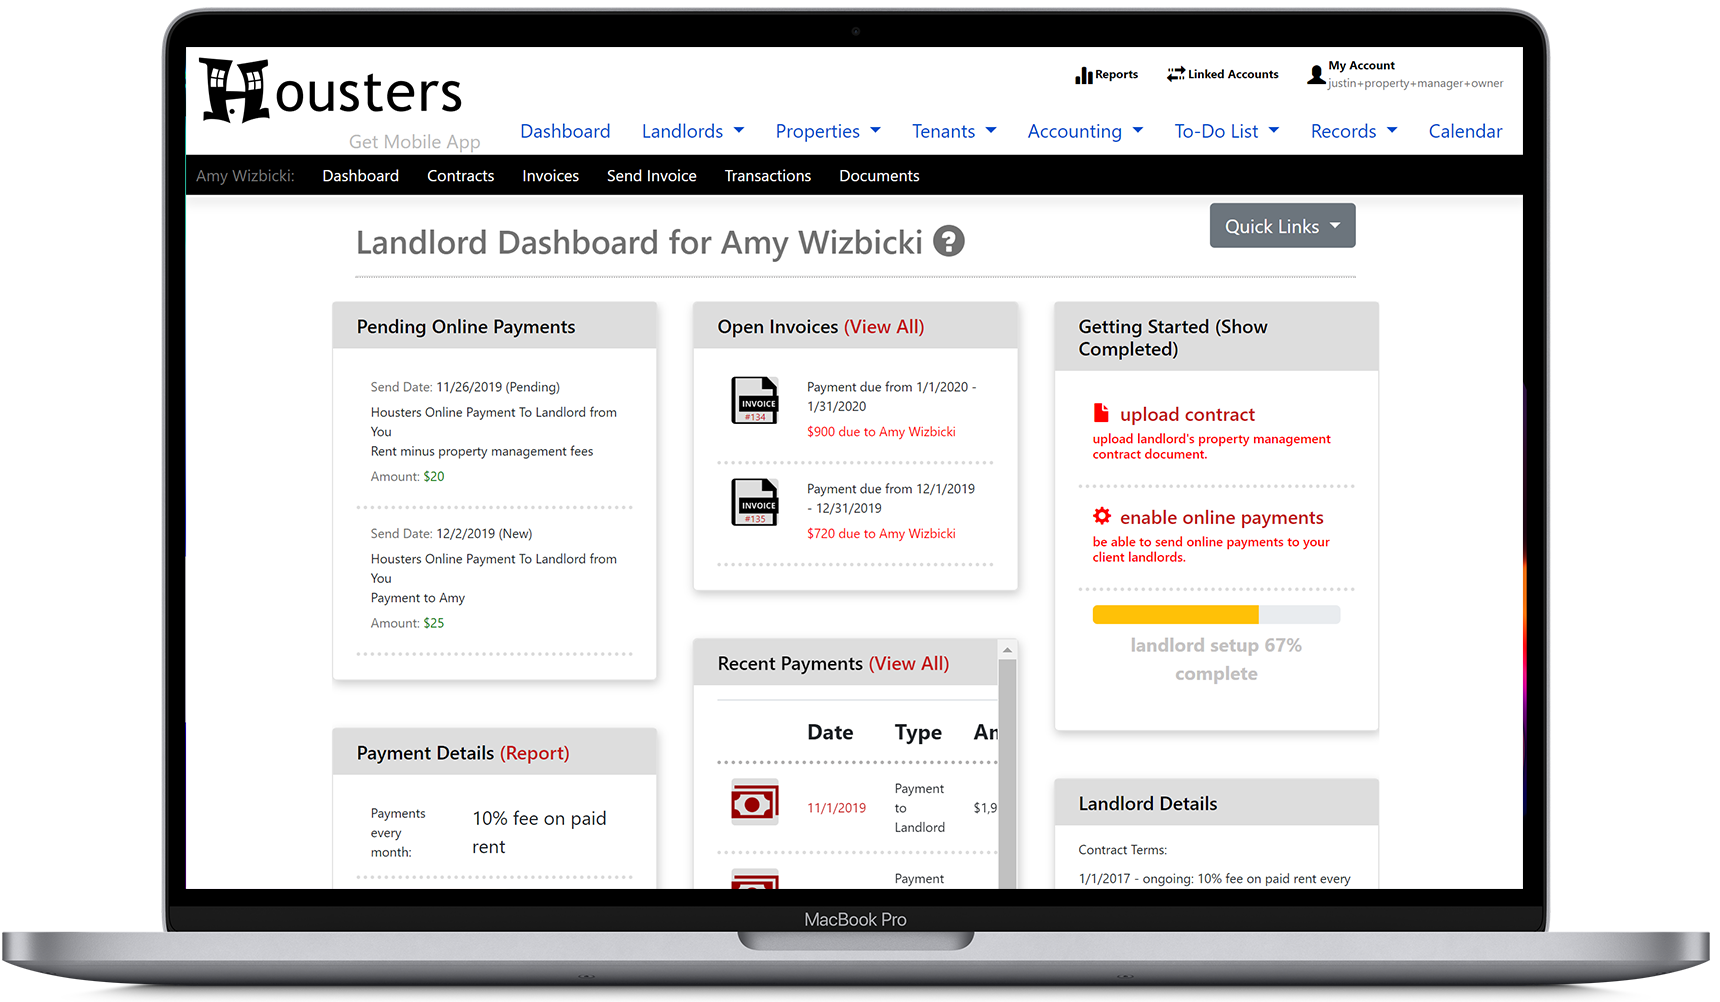 View the landlord dashboard, showing pending online payments, open invoices, and landlord details